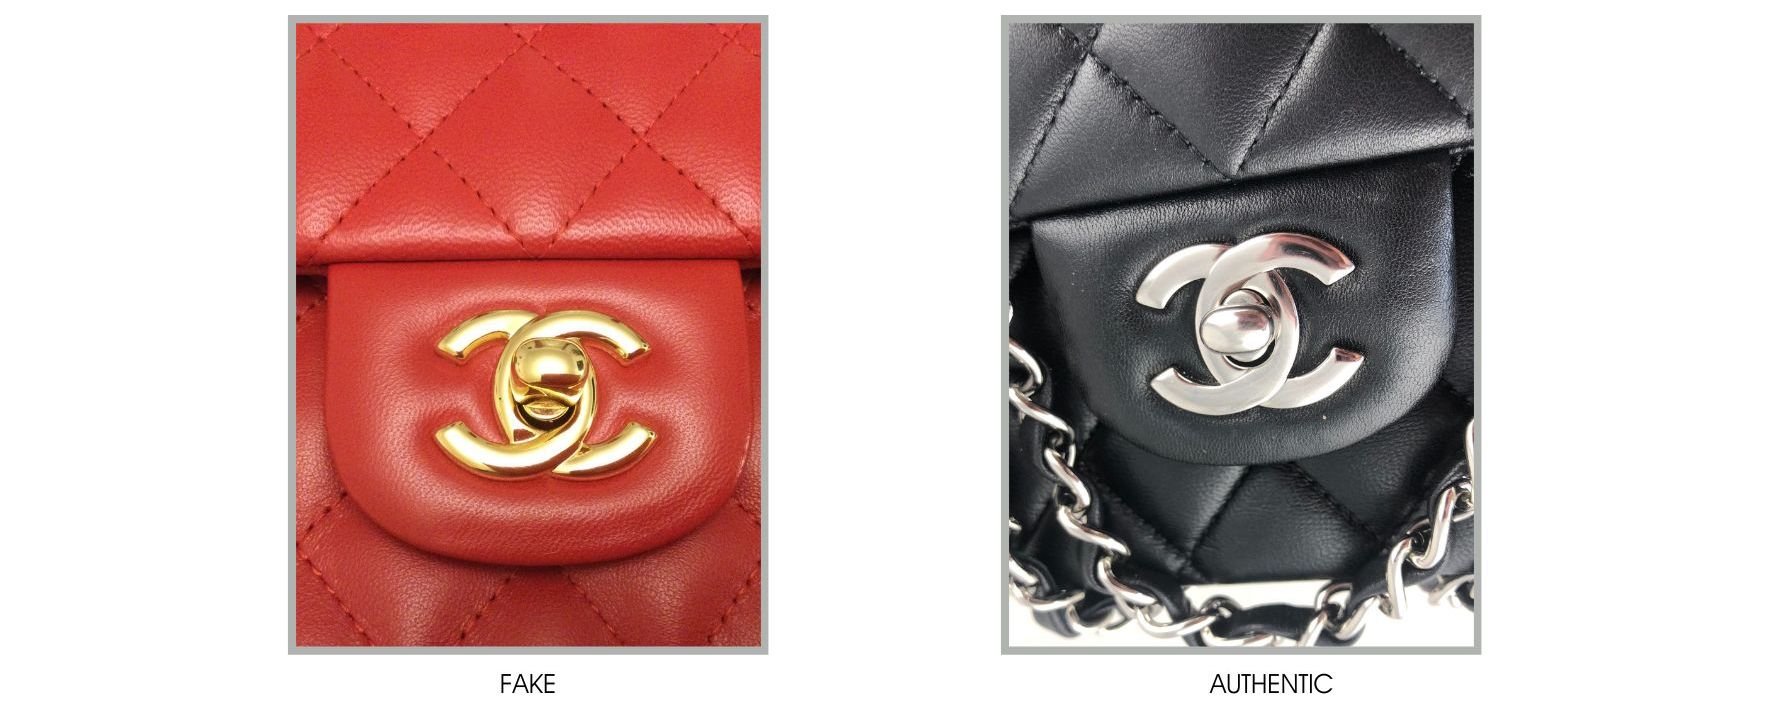 CHANEL | Bags | Authentic Chanel Caviar Boy Leather Wallet On Chain Red  Purse Shoulder Bag Woc | Poshmark